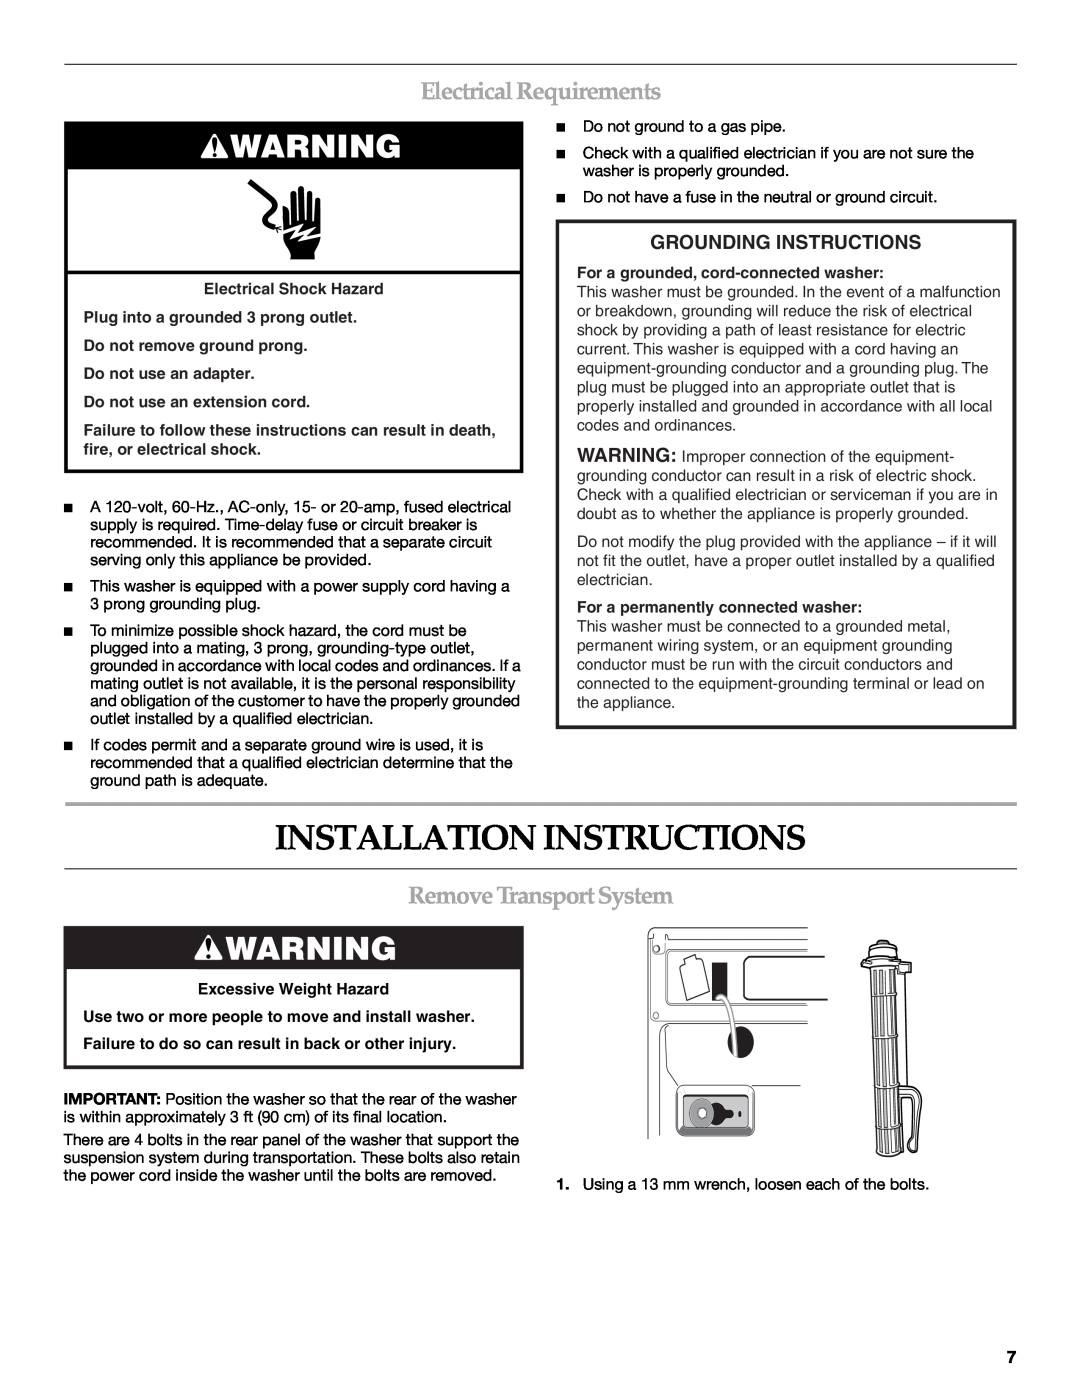 Maytag 8182969 manual Installation Instructions, Electrical Requirements, Remove Transport System, Grounding Instructions 